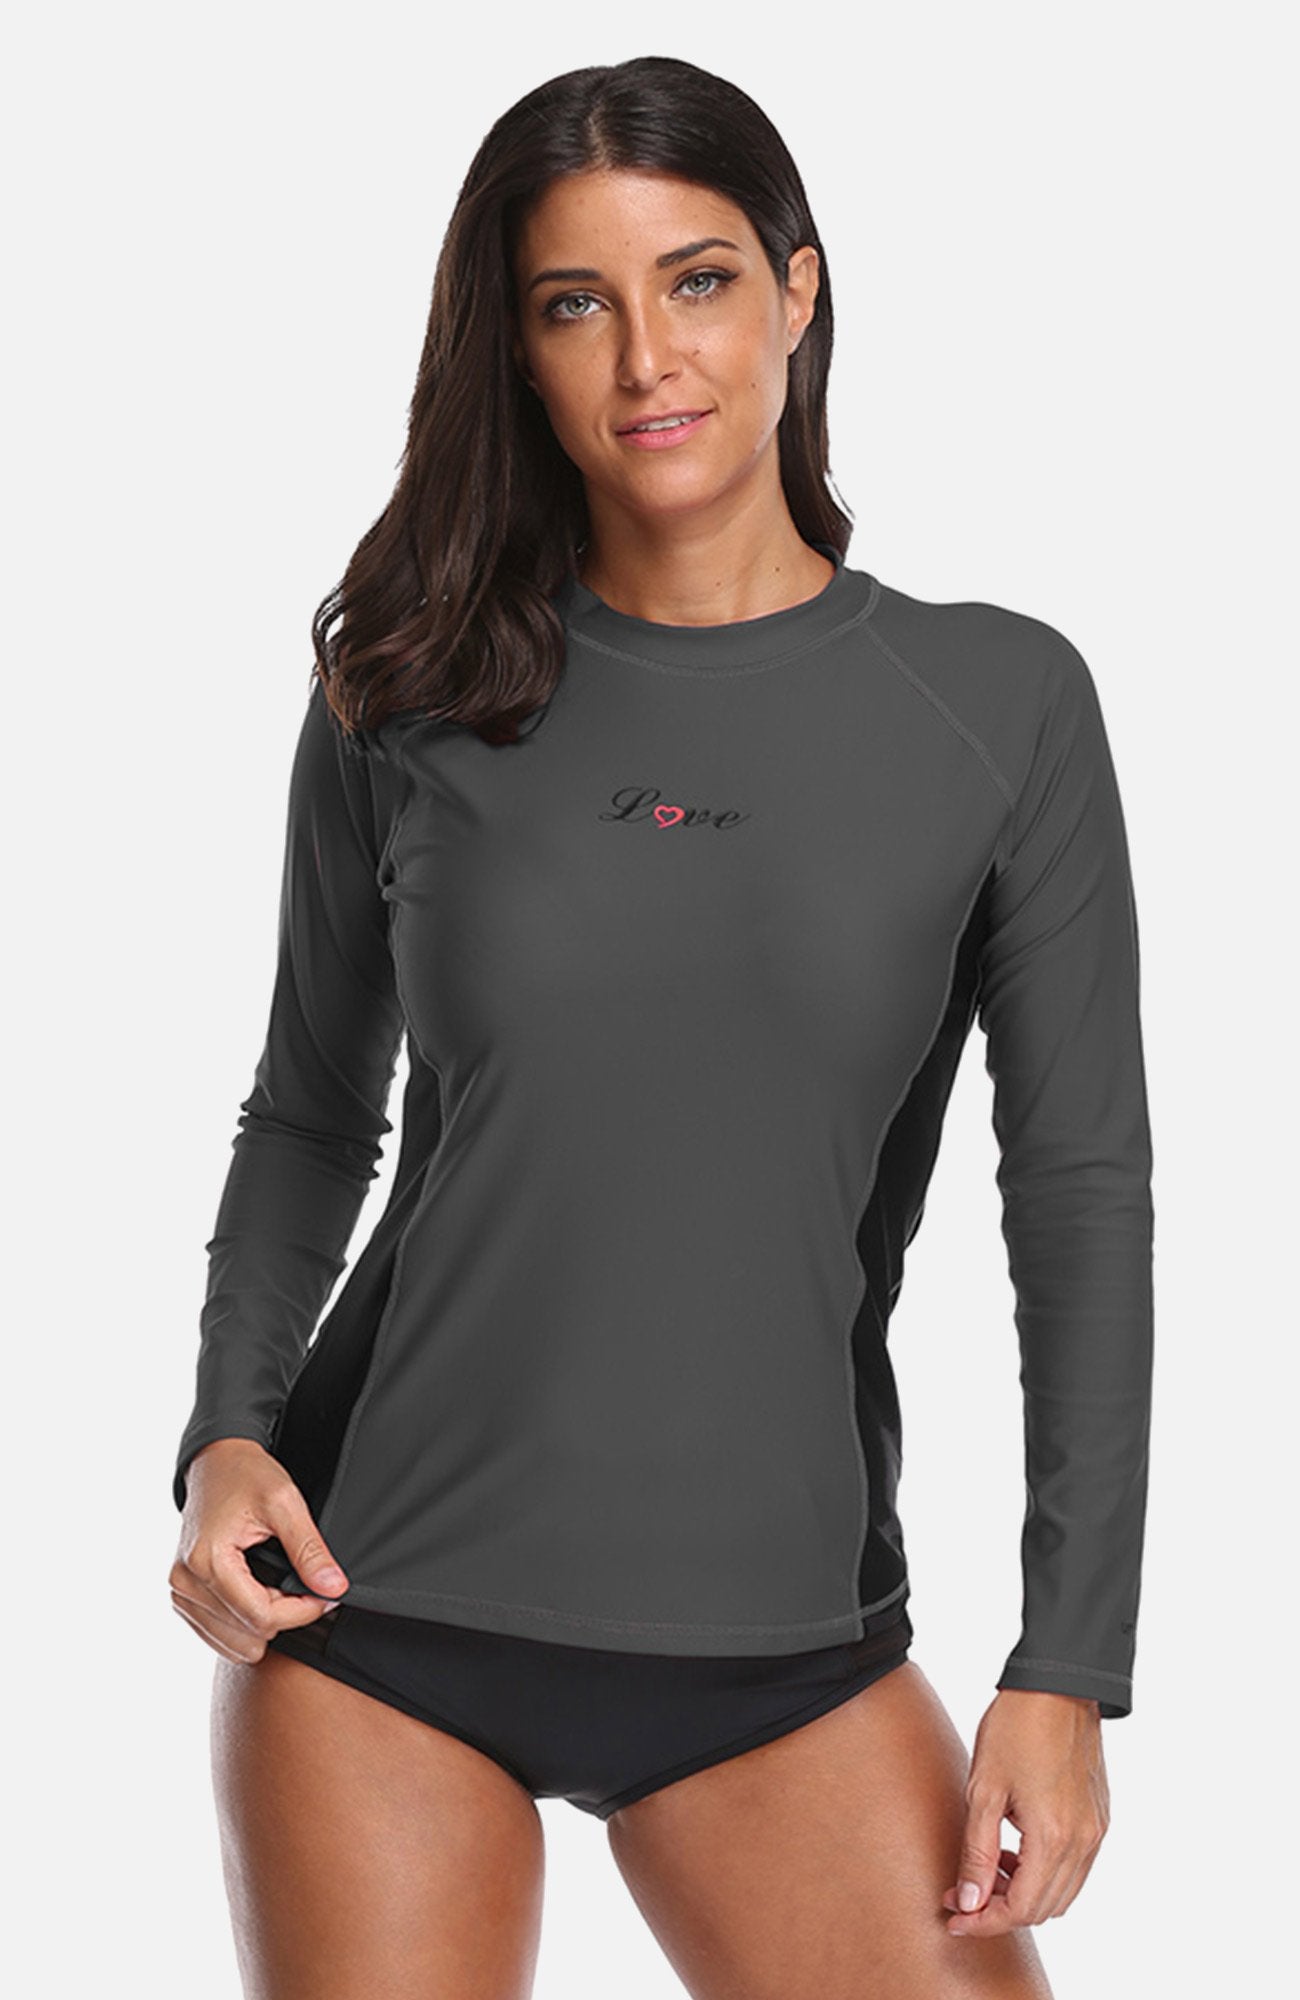 Clearance | Attraco Women's Long Sleeve Sport Fit UPF 50+ Rash Guard Gray-Attraco | Fashion Outdoor Clothing